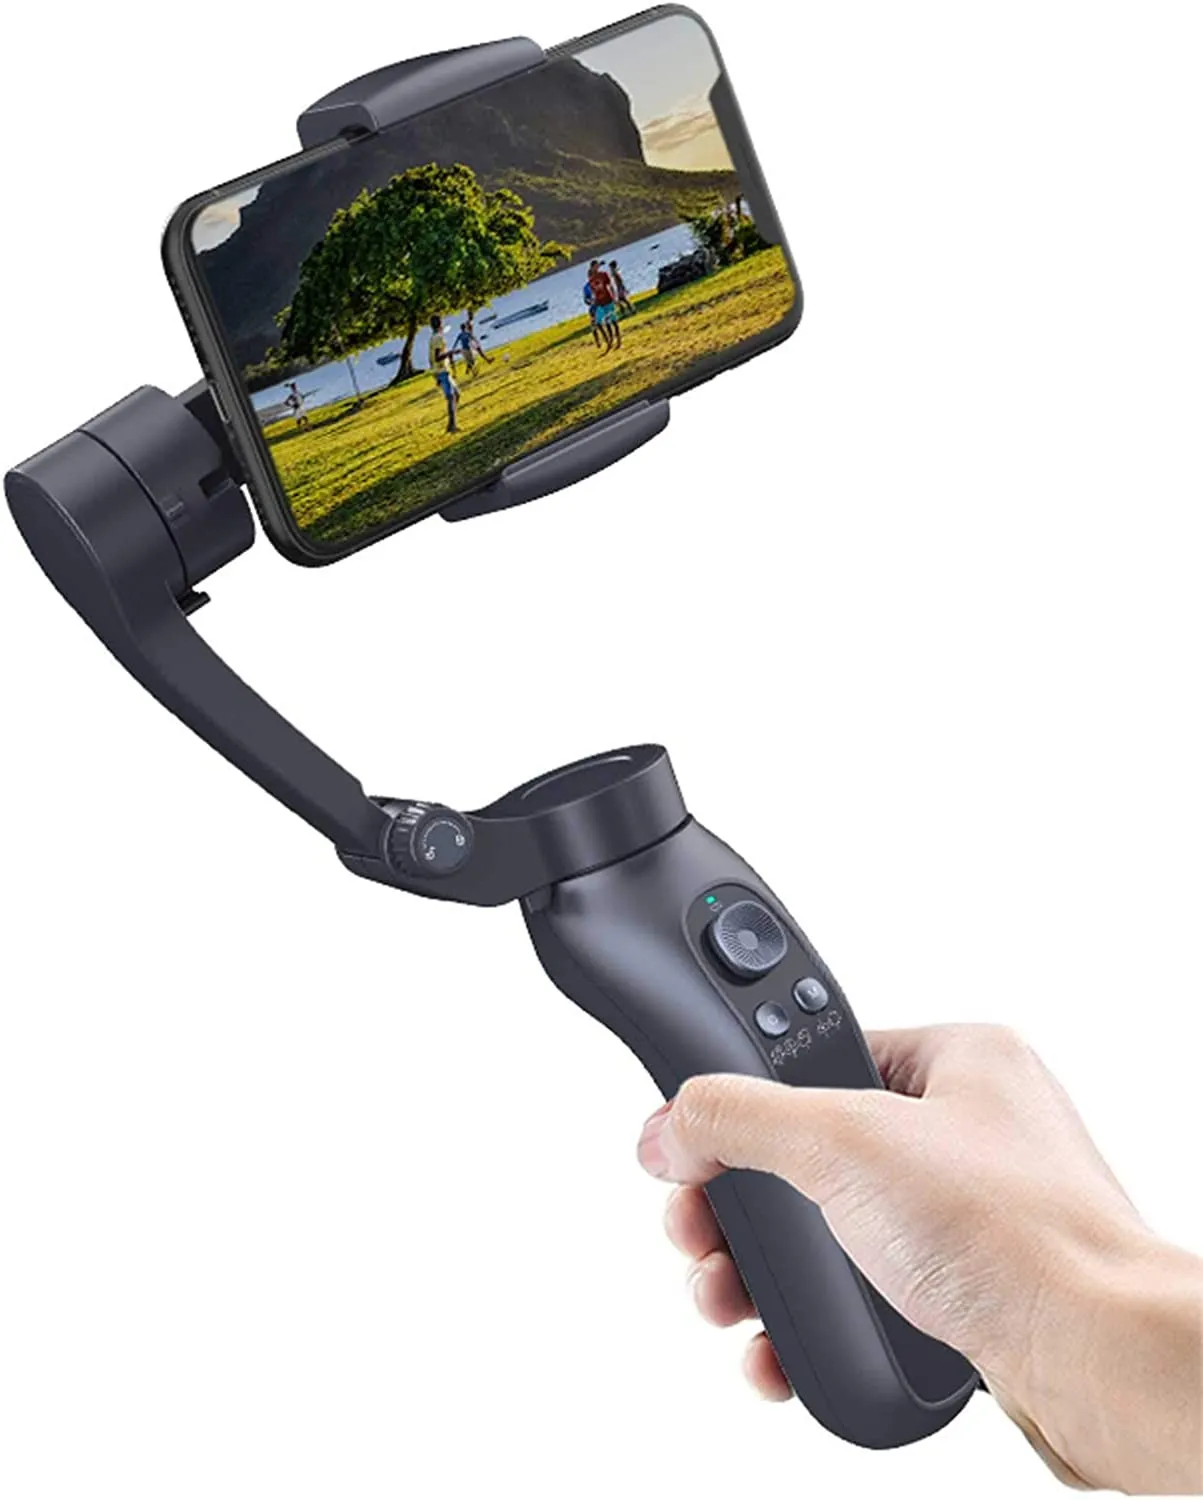 Стабилизатор EverGrow Foldable 3-axis Smartphones Gimbal Professional Video stabilizers for iPhone 11, 12 (GIMBAL-L7B-8)#2